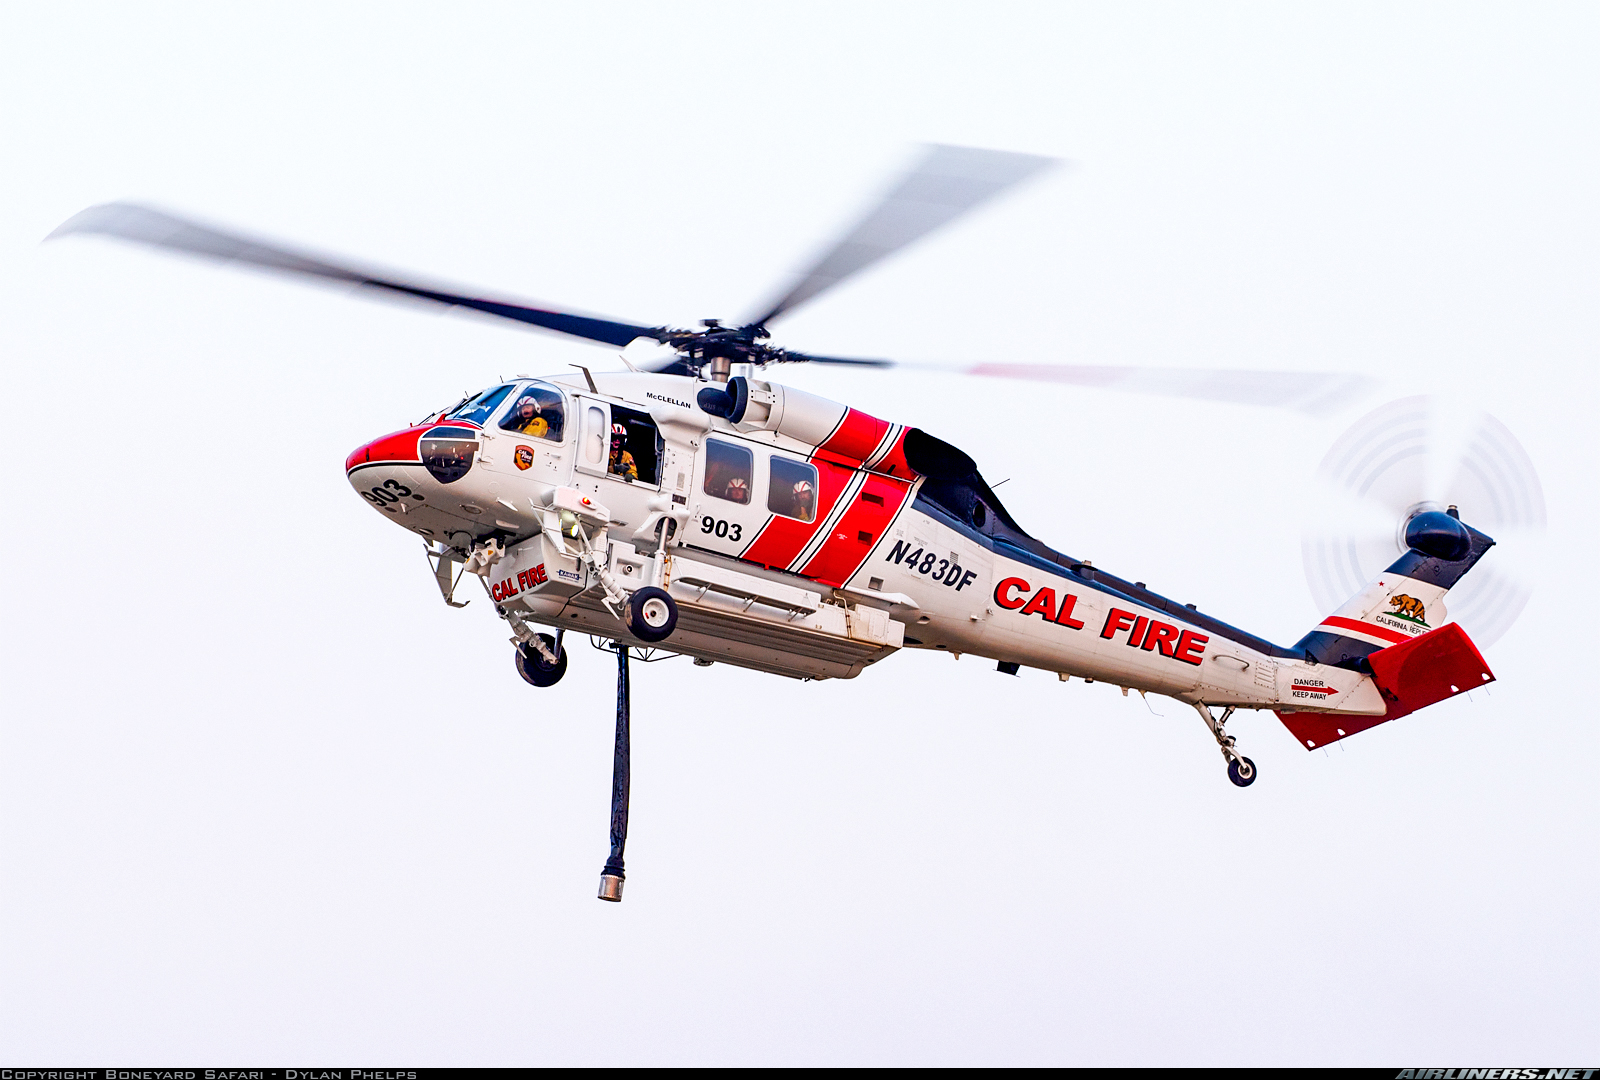 Sikorsky S-70i Firehawk - CDF - California Department of Forestry